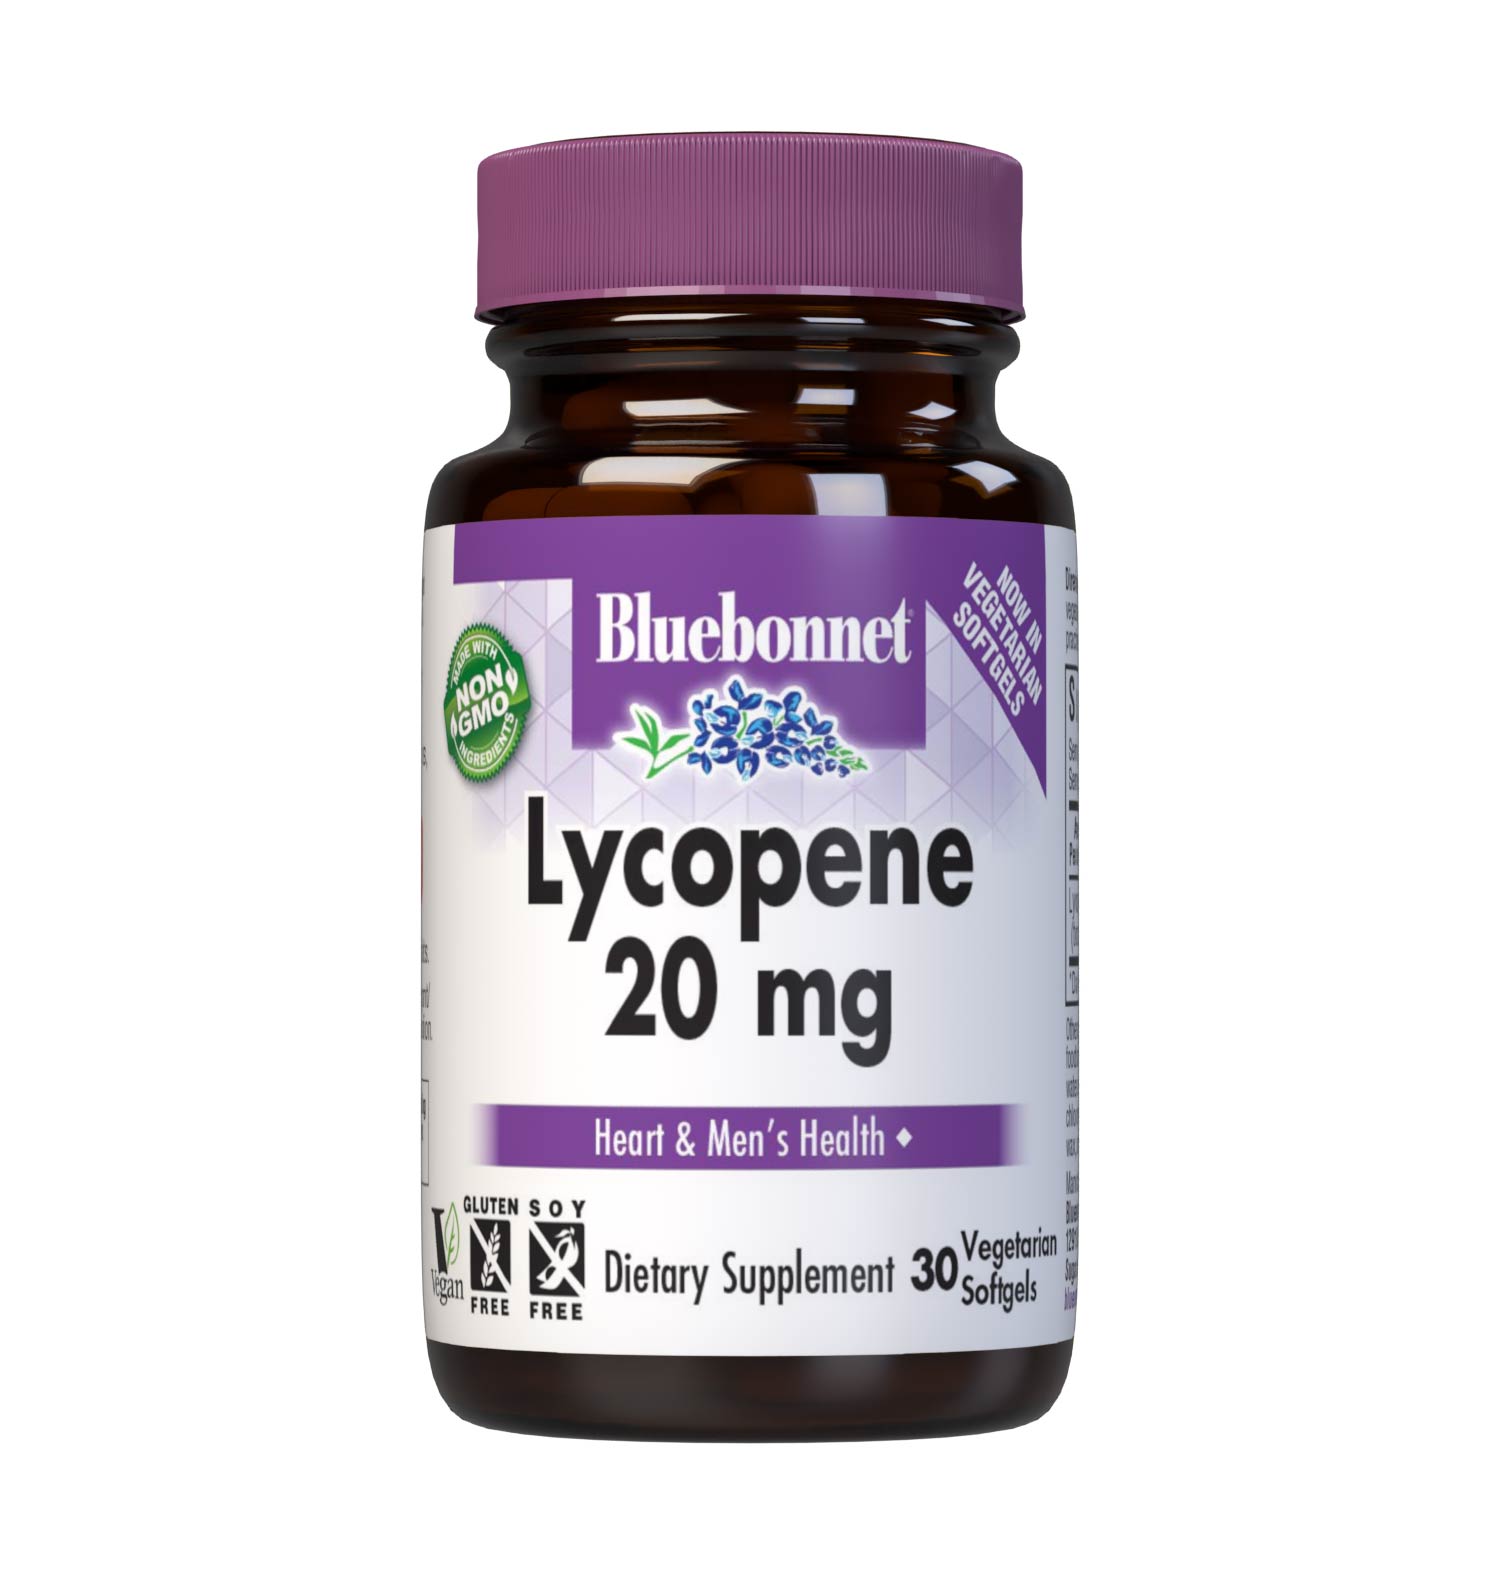 Bluebonnet’s Lycopene 20 mg 30 Softgels are formulated with lycopene from tomato fruit extract imported from Israel. Lycopene is known for its potent antioxidant properties, as well as supporting cardiovascular and men's health. #size_30 count